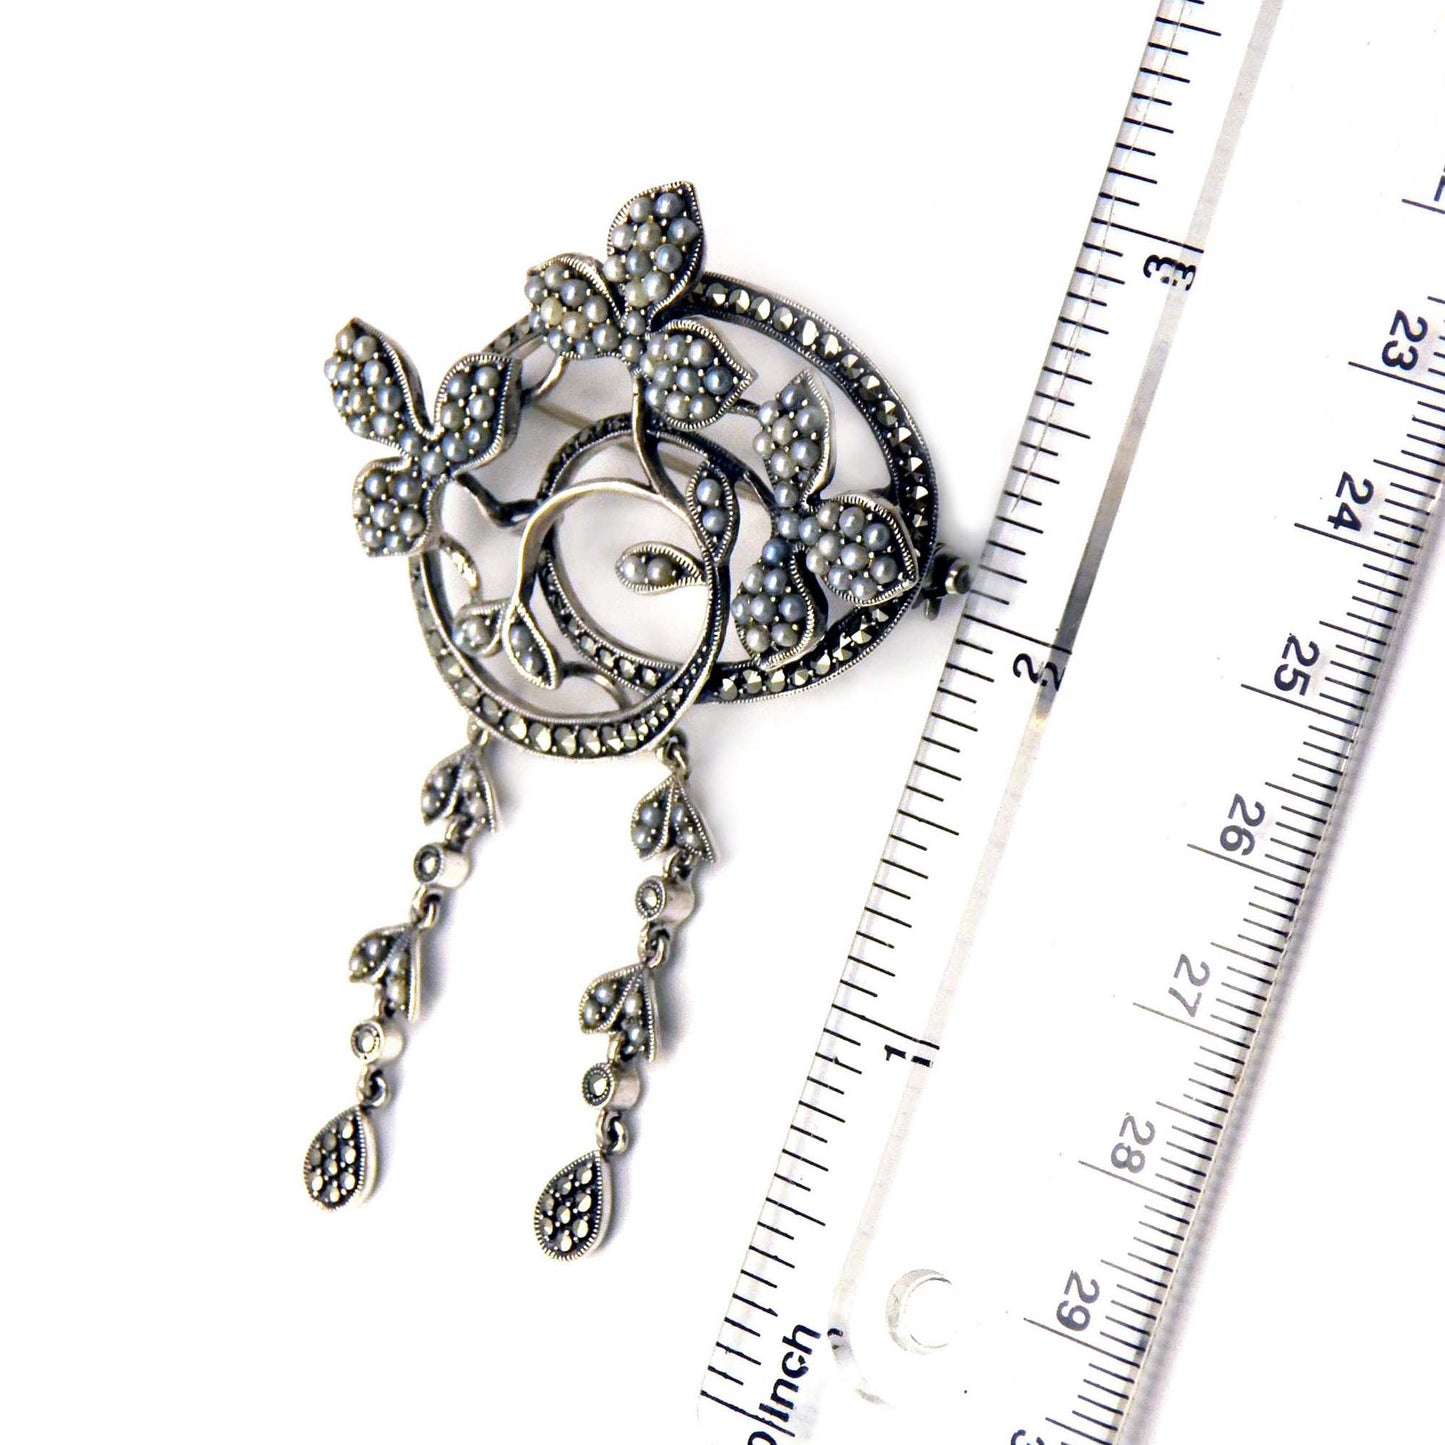 Marcasite and Seed Pearl Brooch, Sterling Silver Pin, Victorian Revival Jewelry